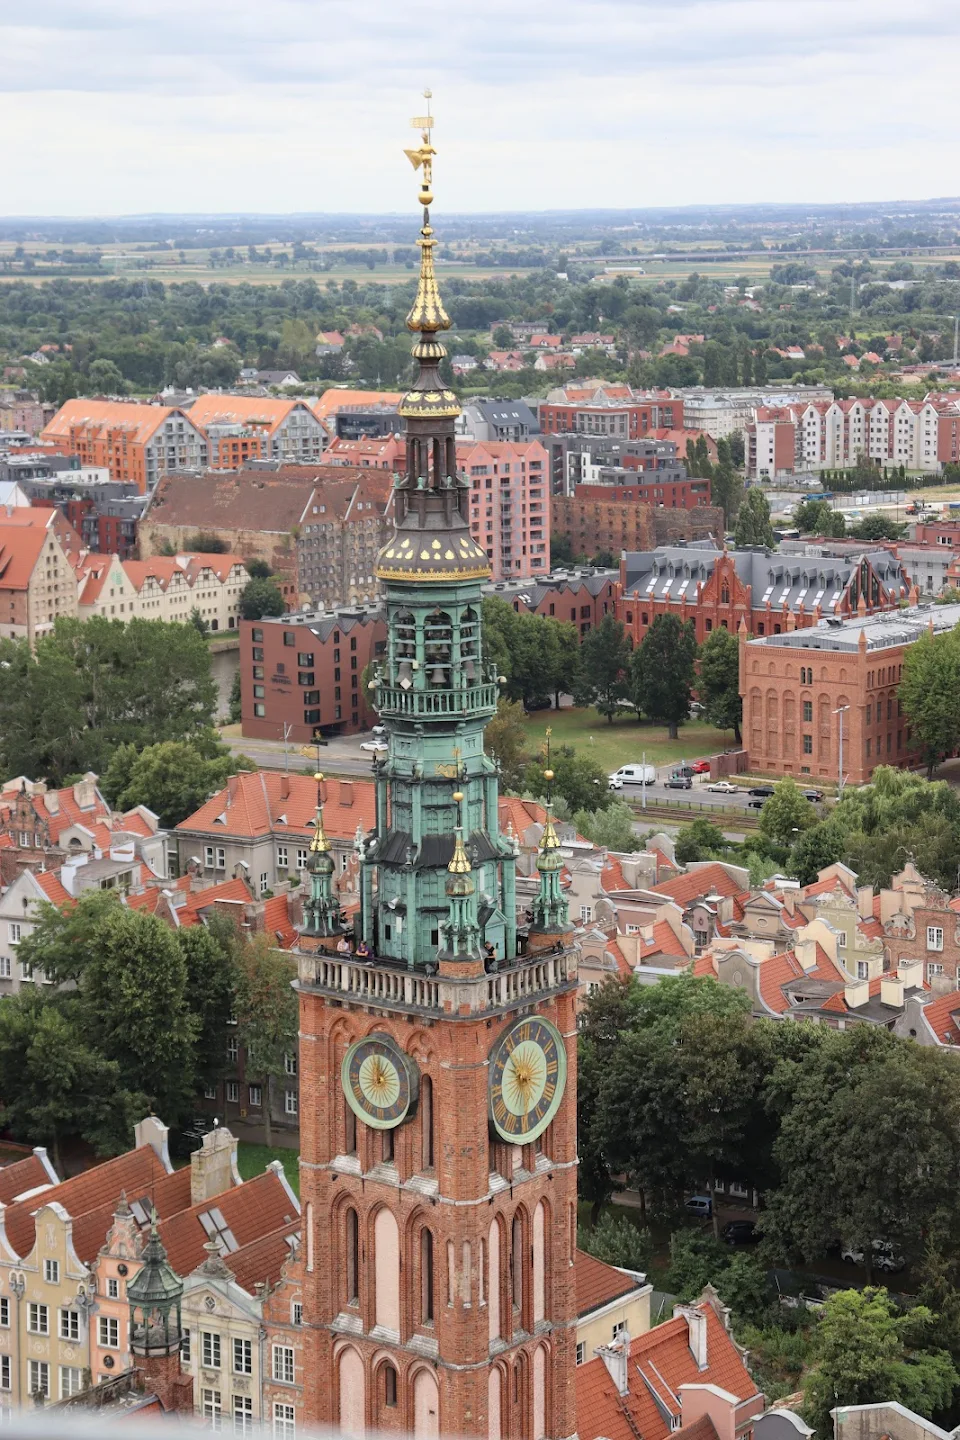 [OC] Warsaw Main City Hall. Climbed 415 steps to the top of the Basilica to get this shot :D